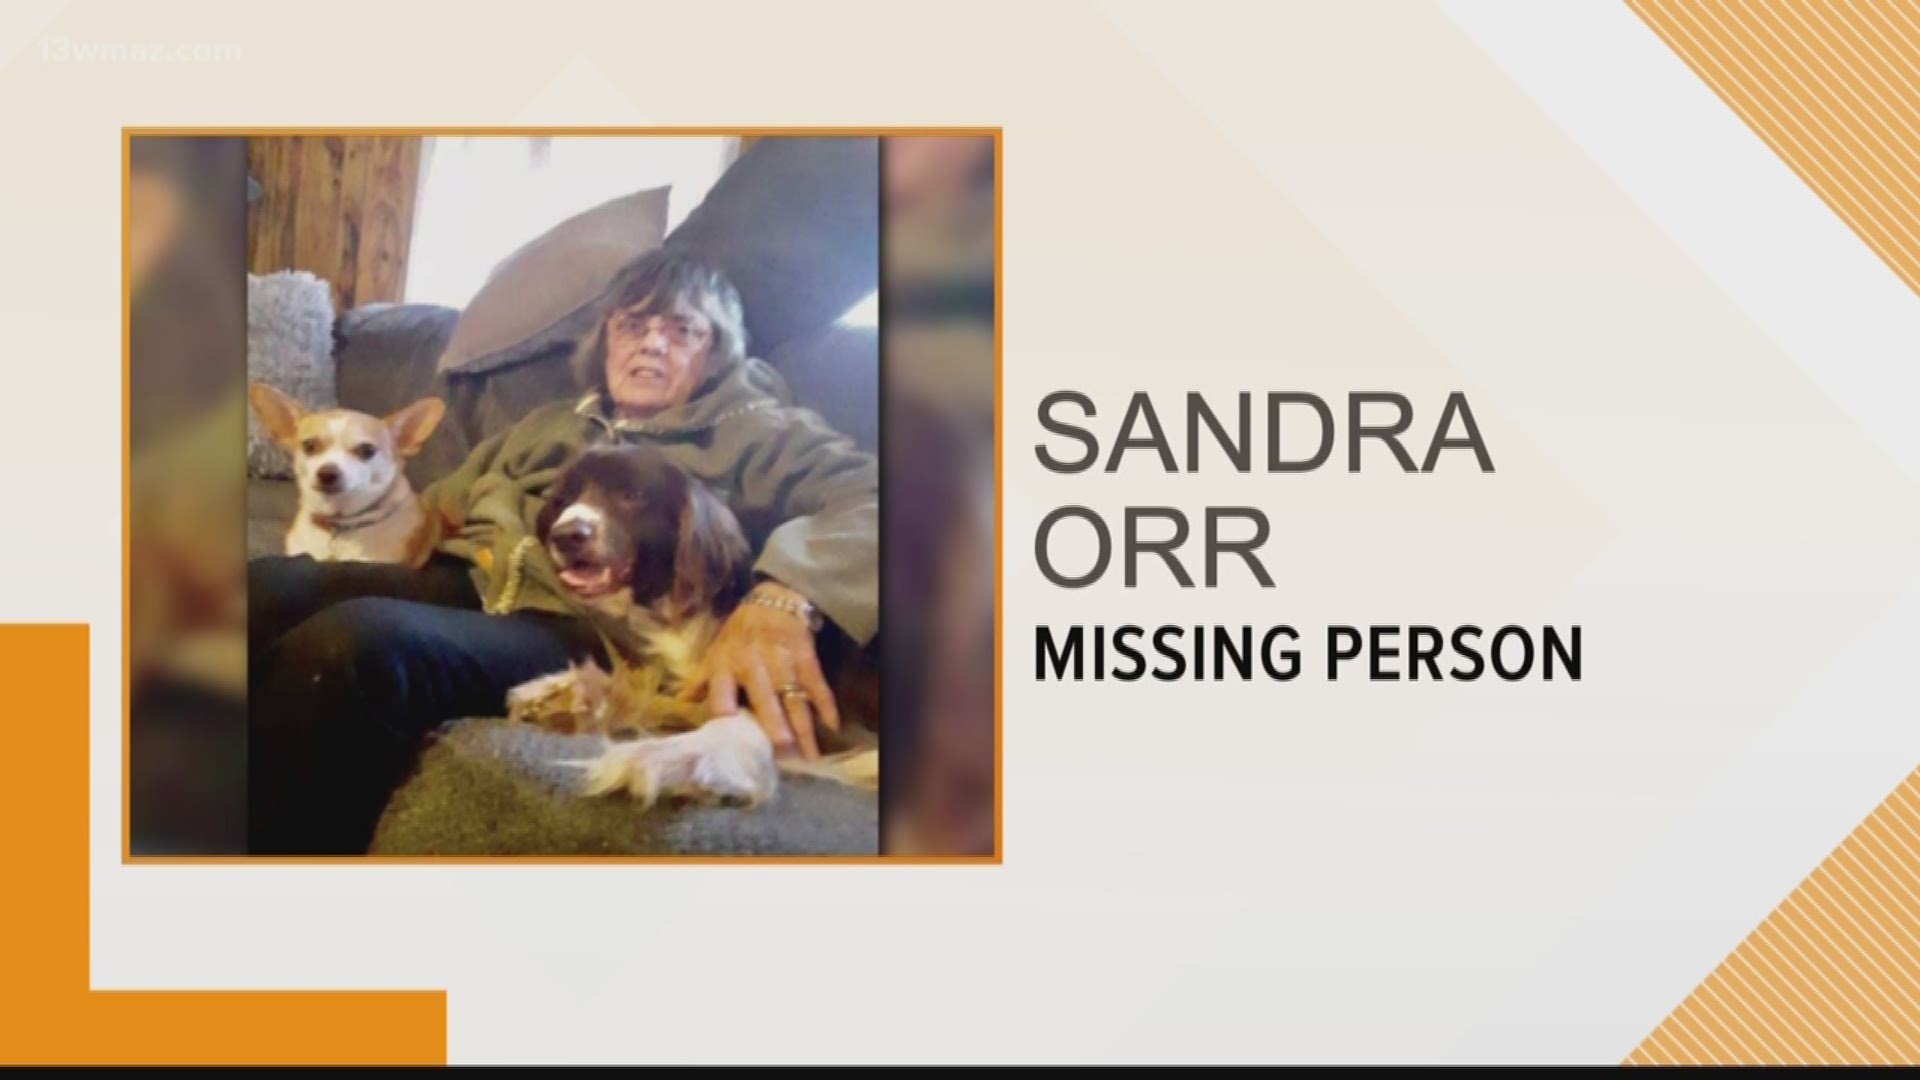 Sandra Orr went missing Tuesday morning, according to the Bibb County Sheriff's Office.